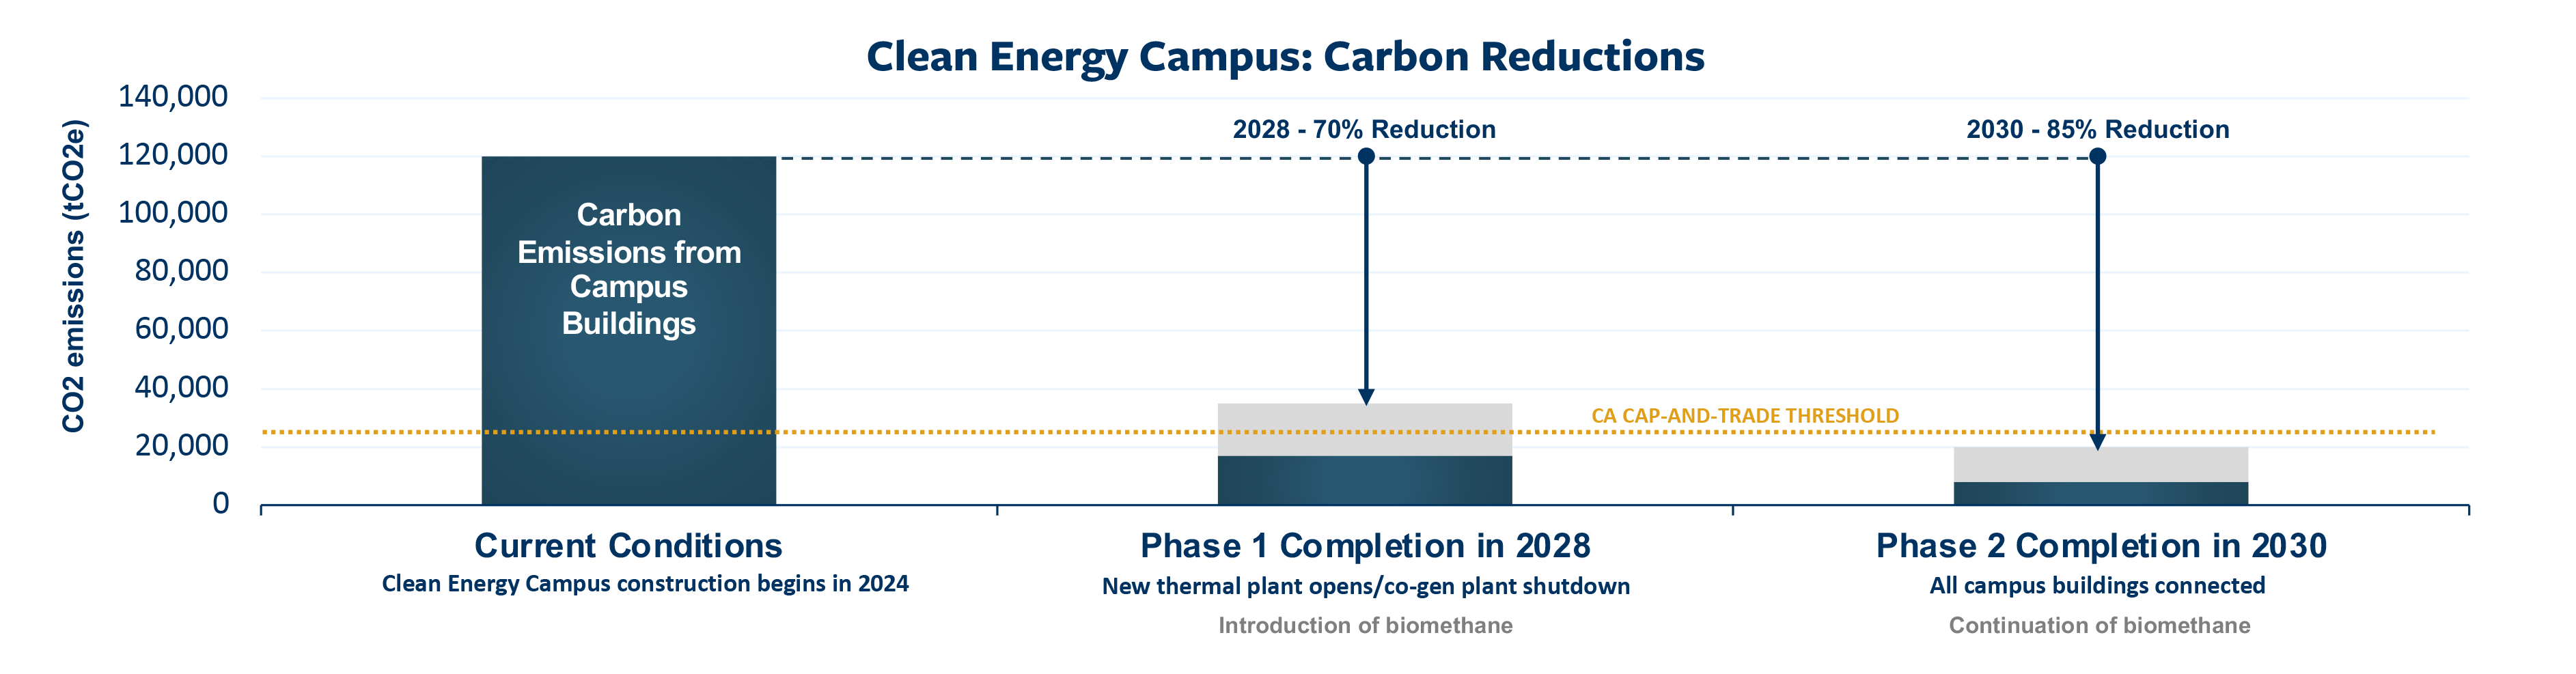 anticipated carbon reductions from Berkeley Clean Energy Campus (bar graph-decorative))